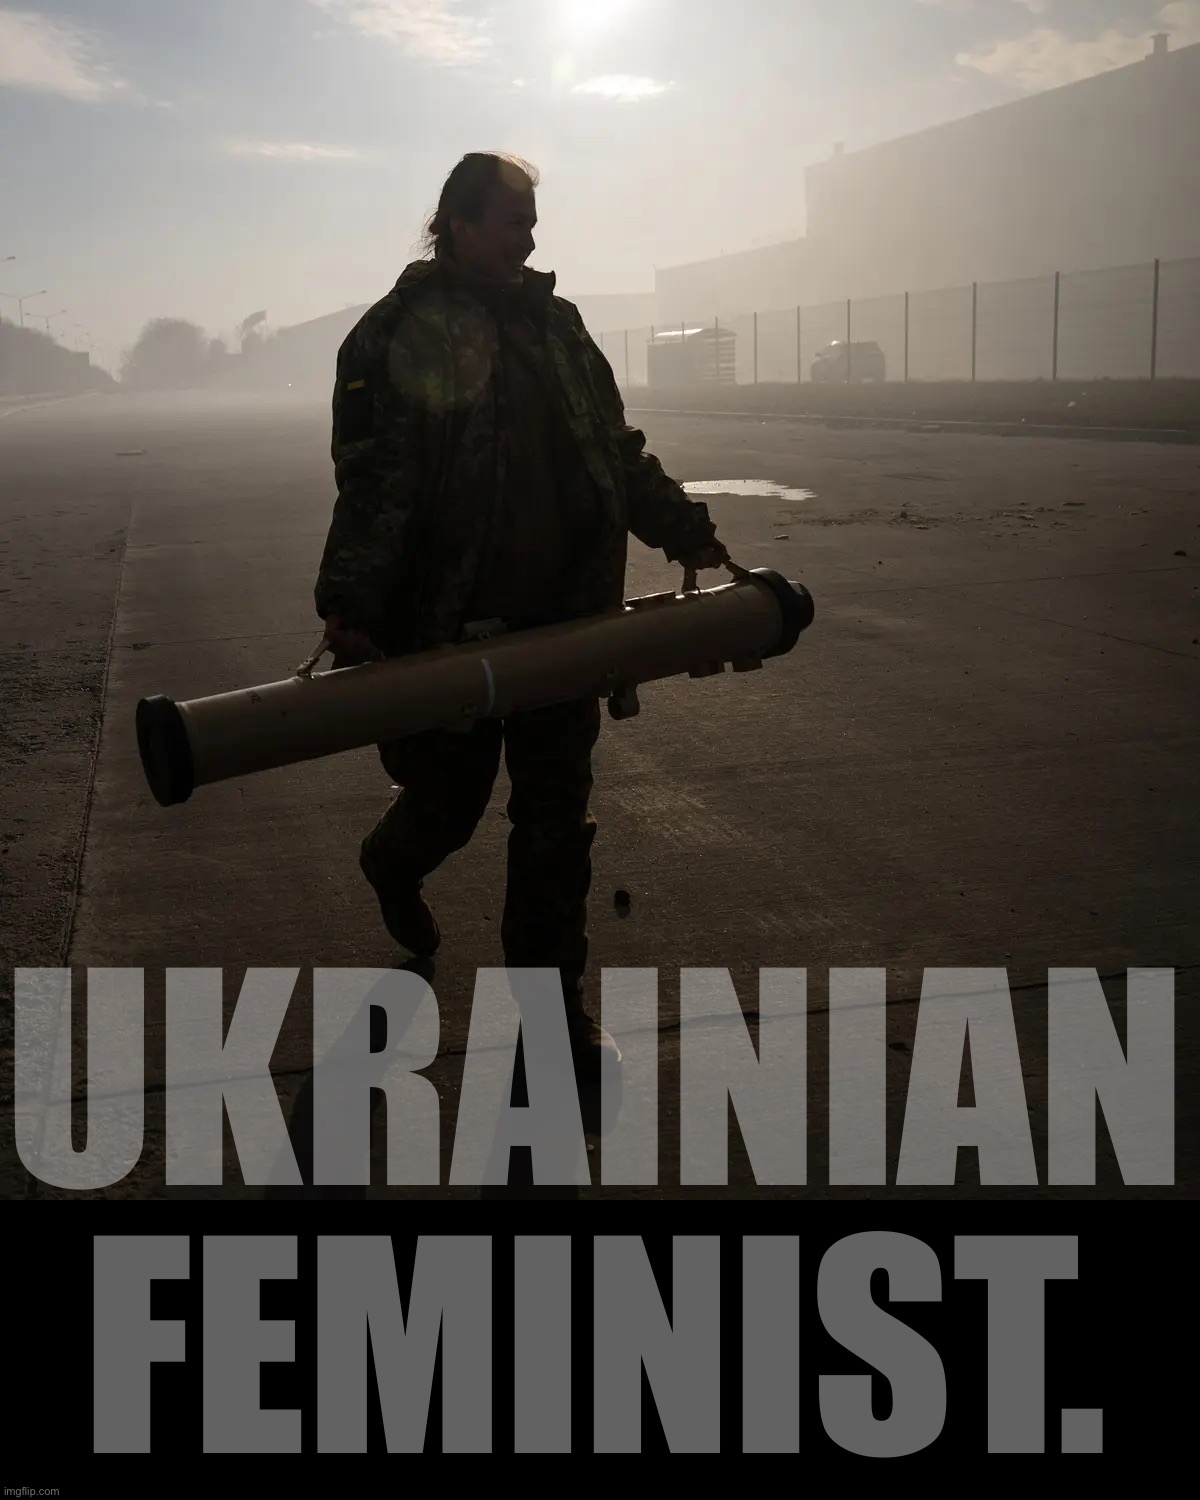 Lt. Tetiana Chornoval, commander of an anti-tank missile unit, on the outskirts of Kiev; early-March 2022. | UKRAINIAN FEMINIST. | image tagged in ukrainian soldier | made w/ Imgflip meme maker